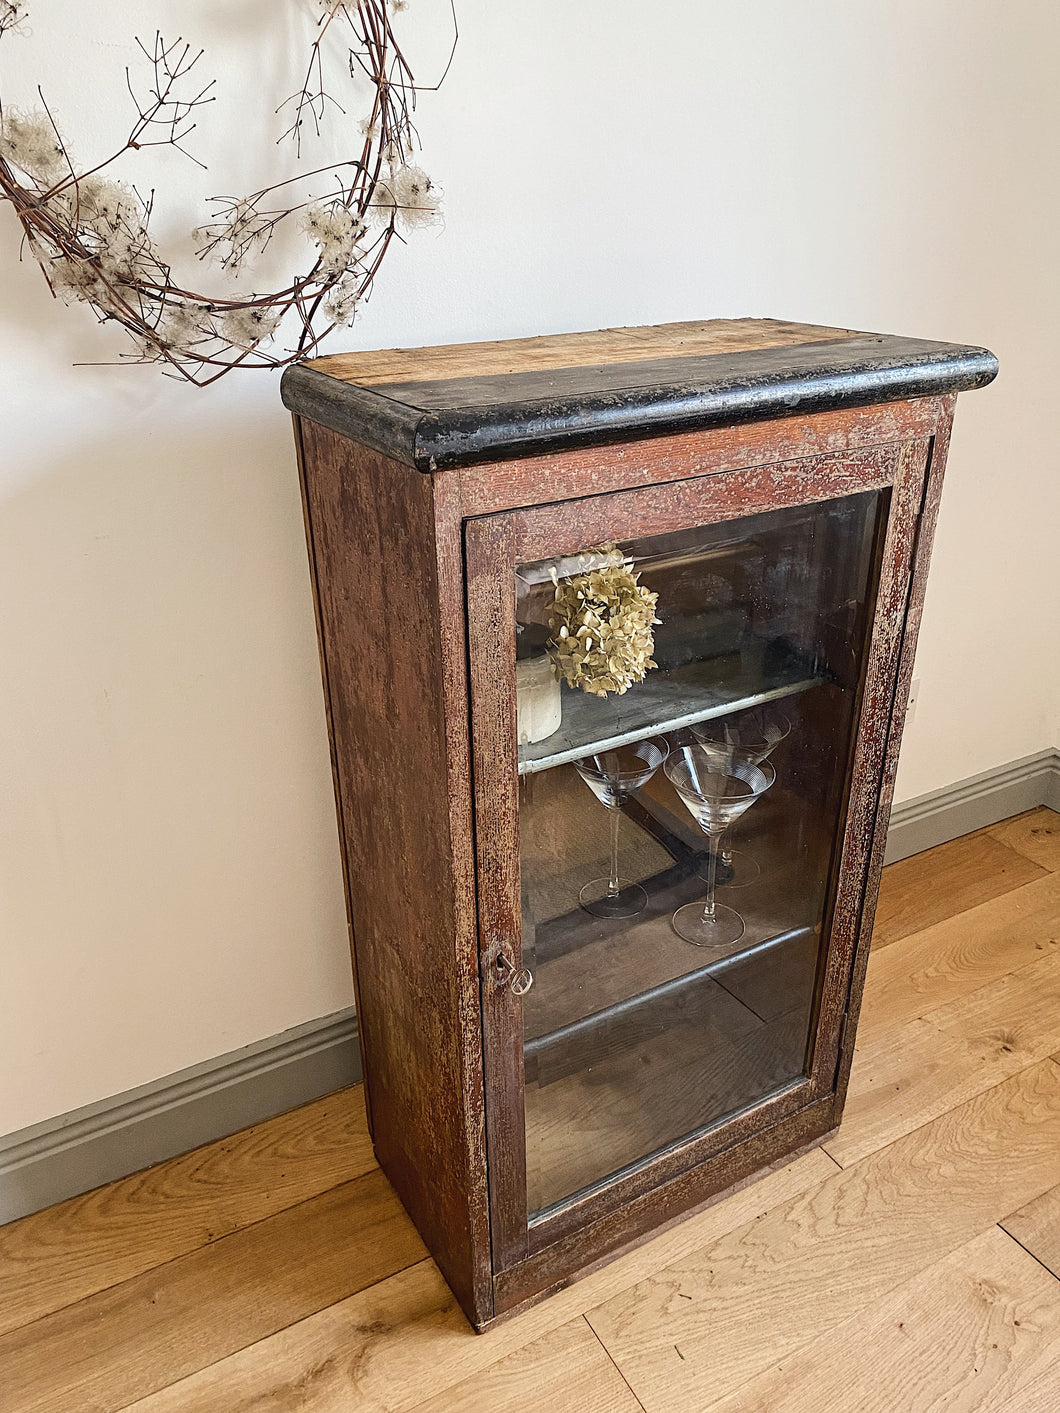 Vintage French glass cabinet